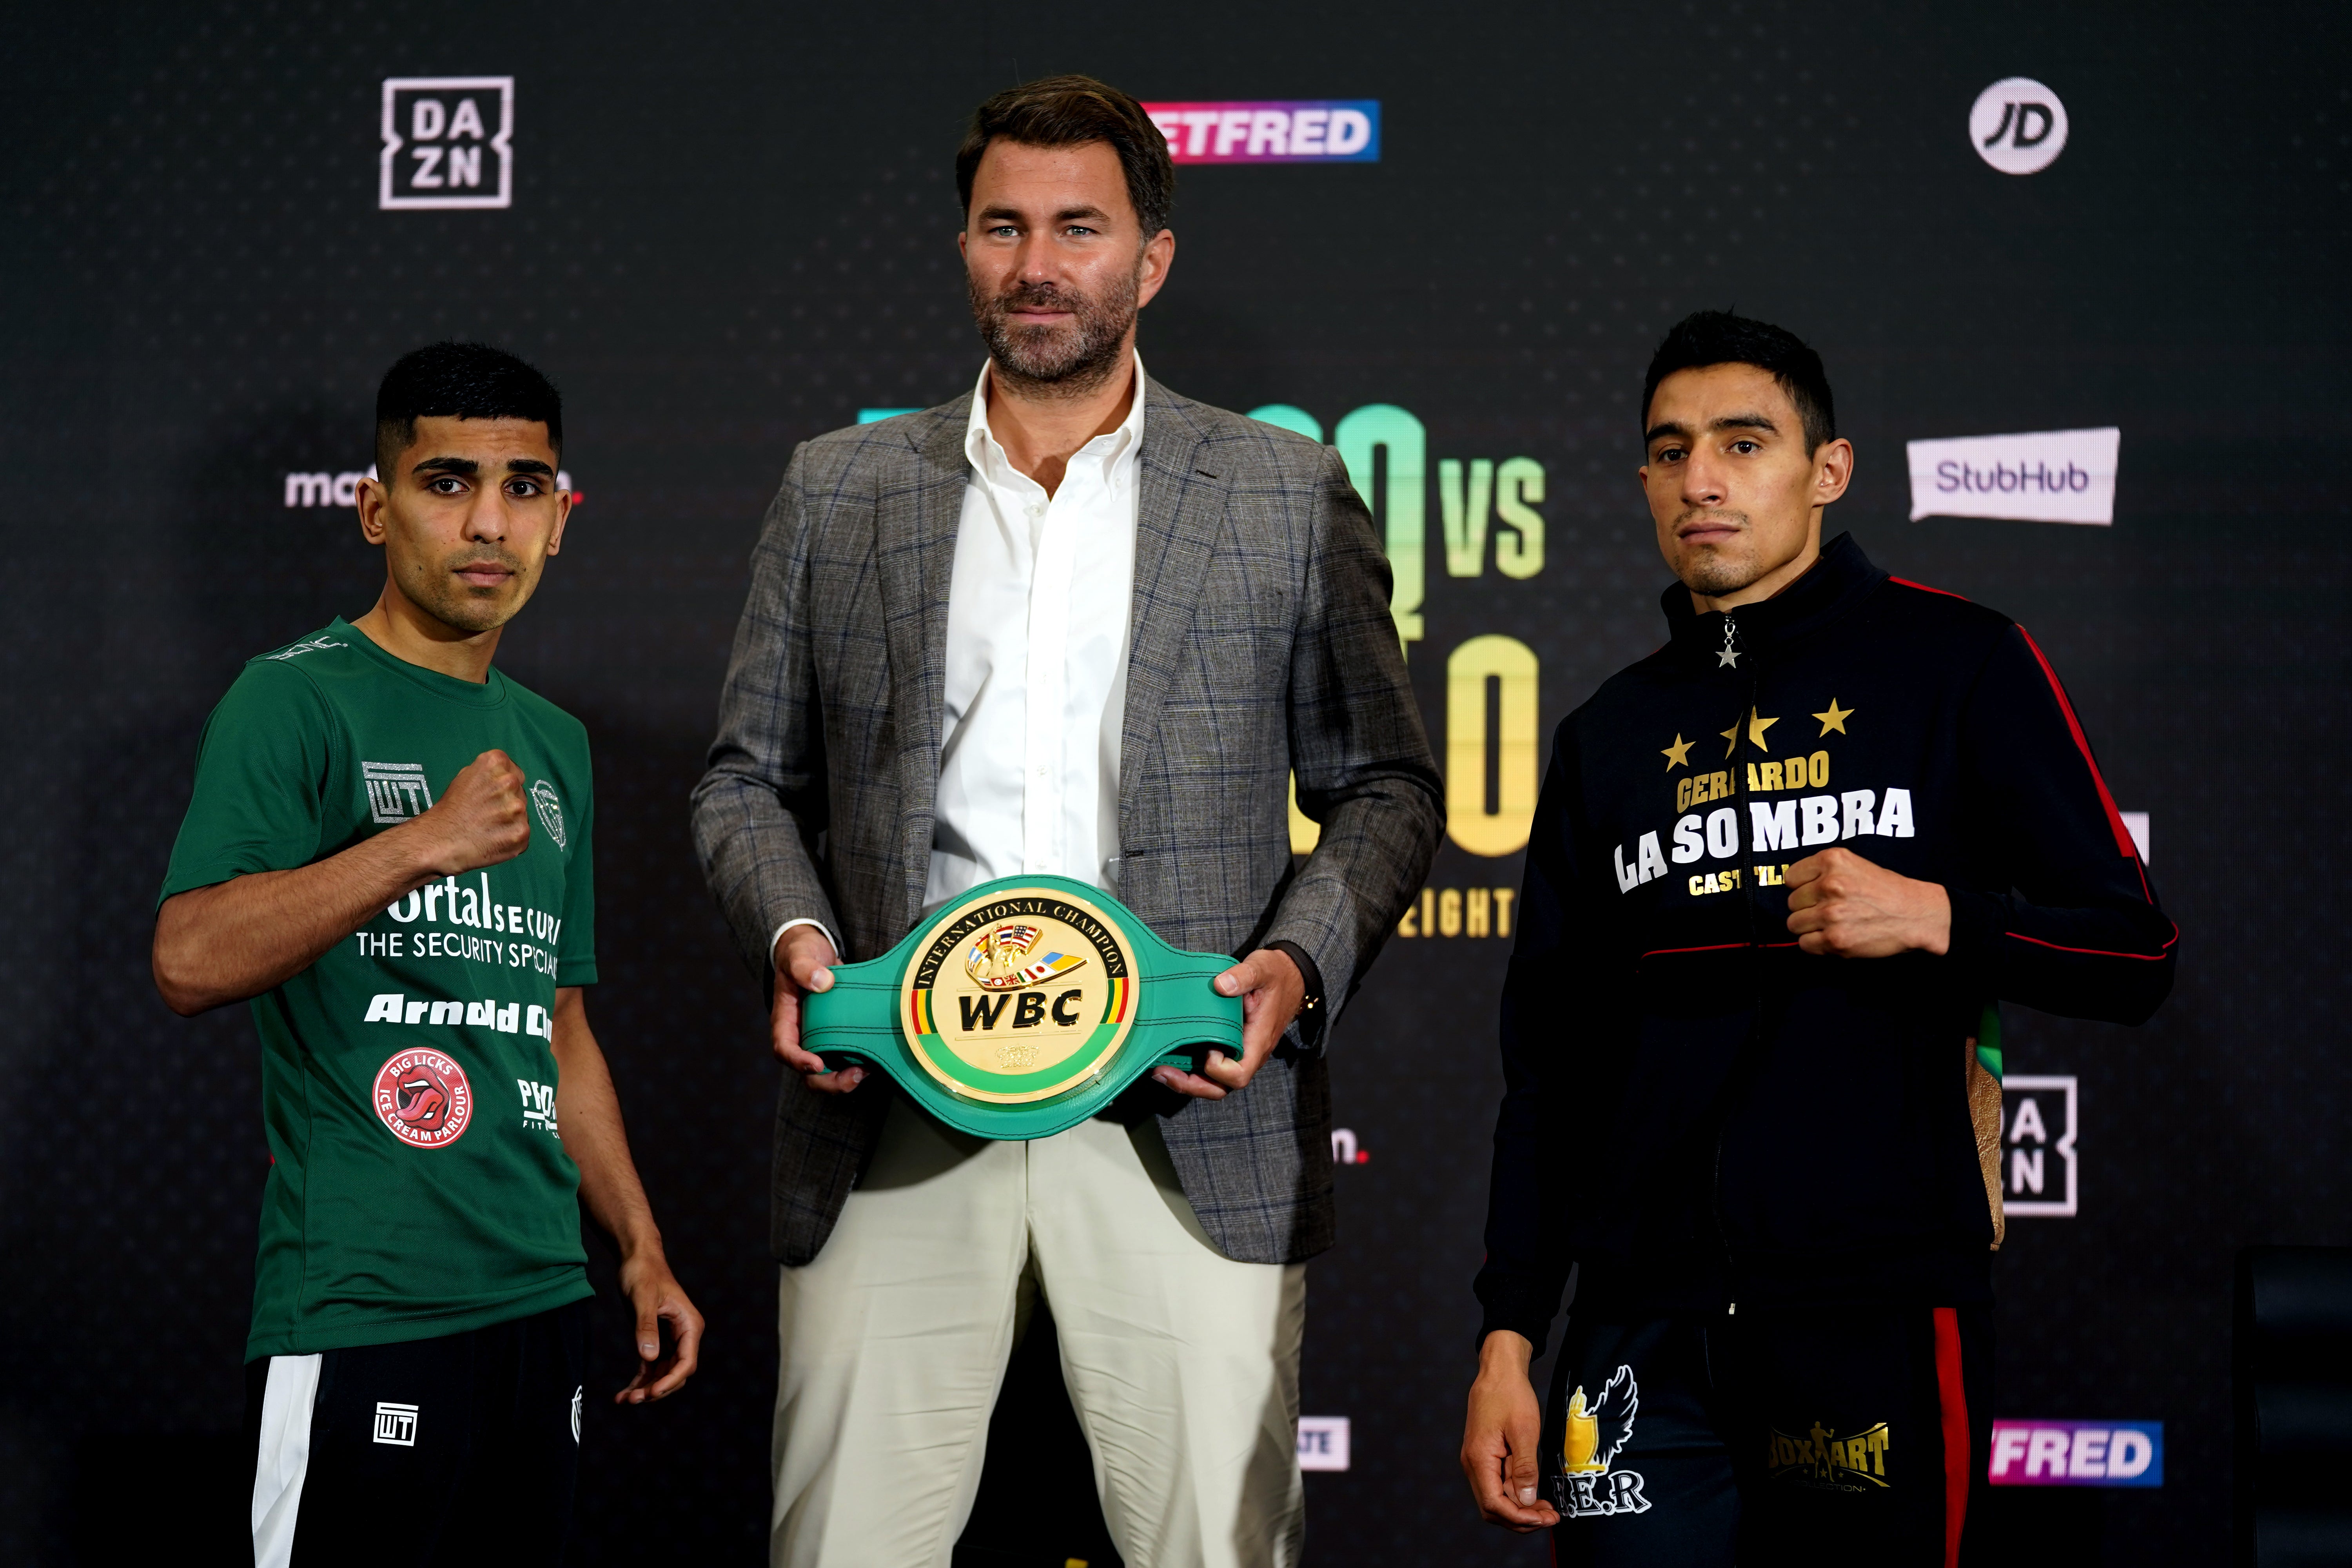 Kash Farooq, left, with promoter Eddie Hearn and opponent Luis Castillo ahead of what proved to be his final fight (John Walton/PA)